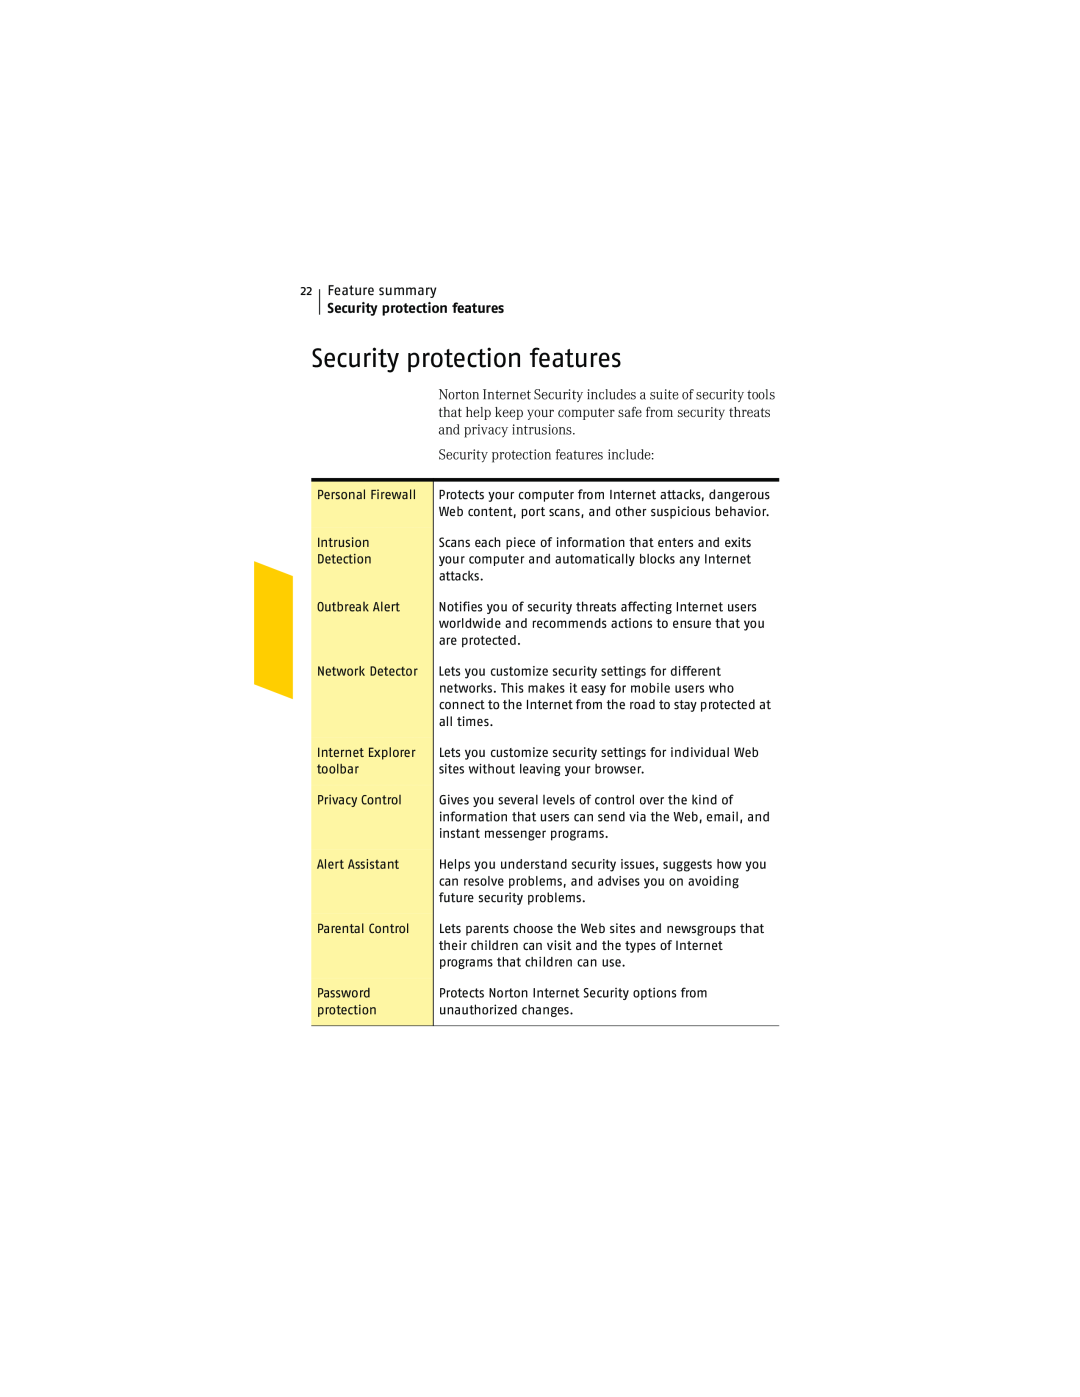 Symantec NIS2005 manual Security protection features, 22Feature summary 